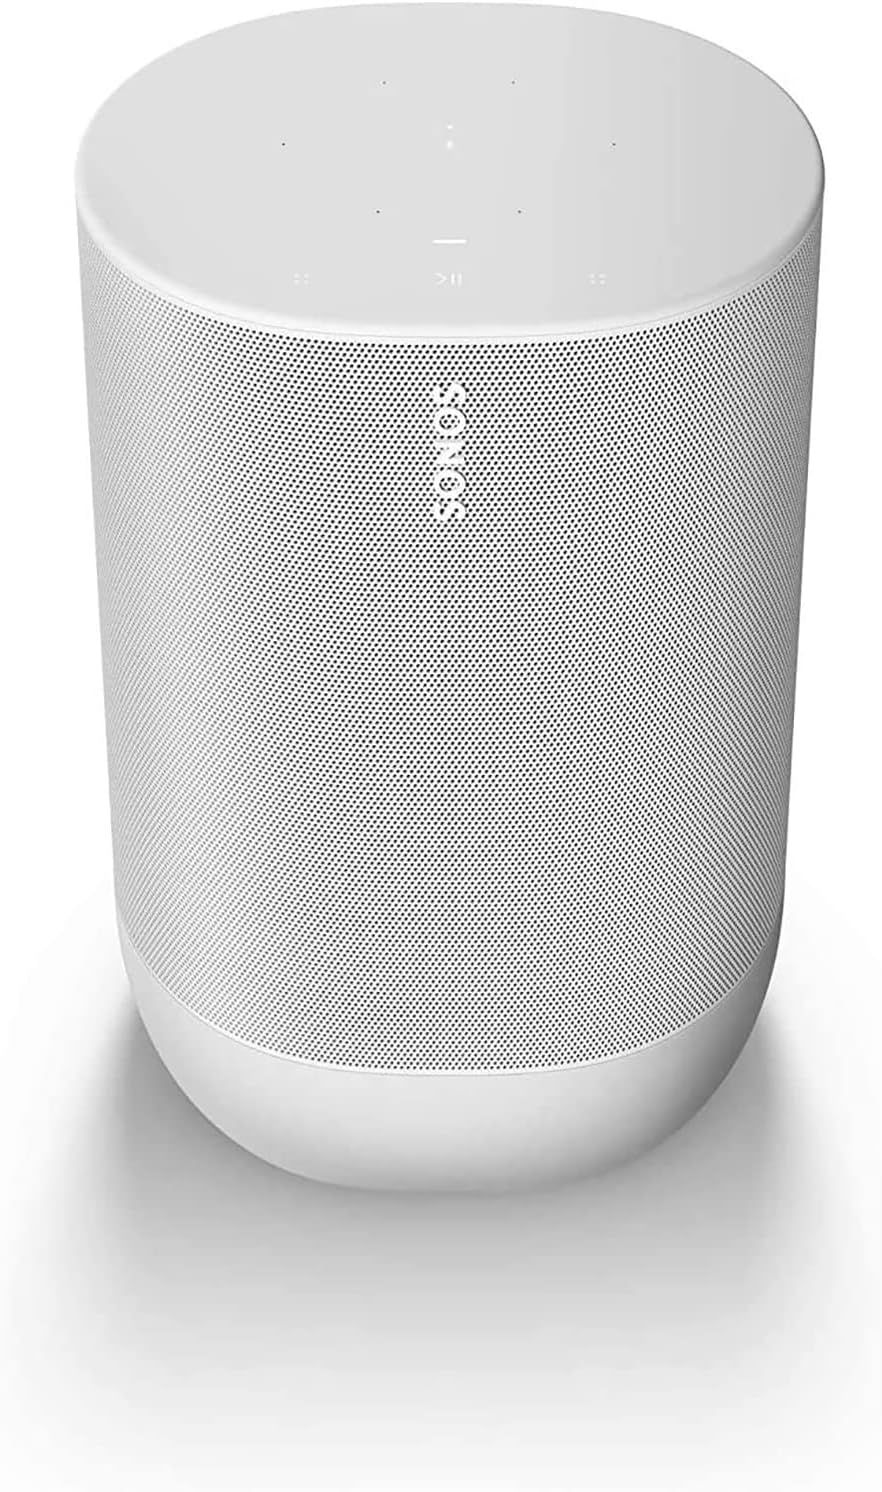 Sonos Move - Battery-Powered Smart Speaker, Wi-Fi and Bluetooth with Alexa Built-in - Lunar White | Amazon (US)